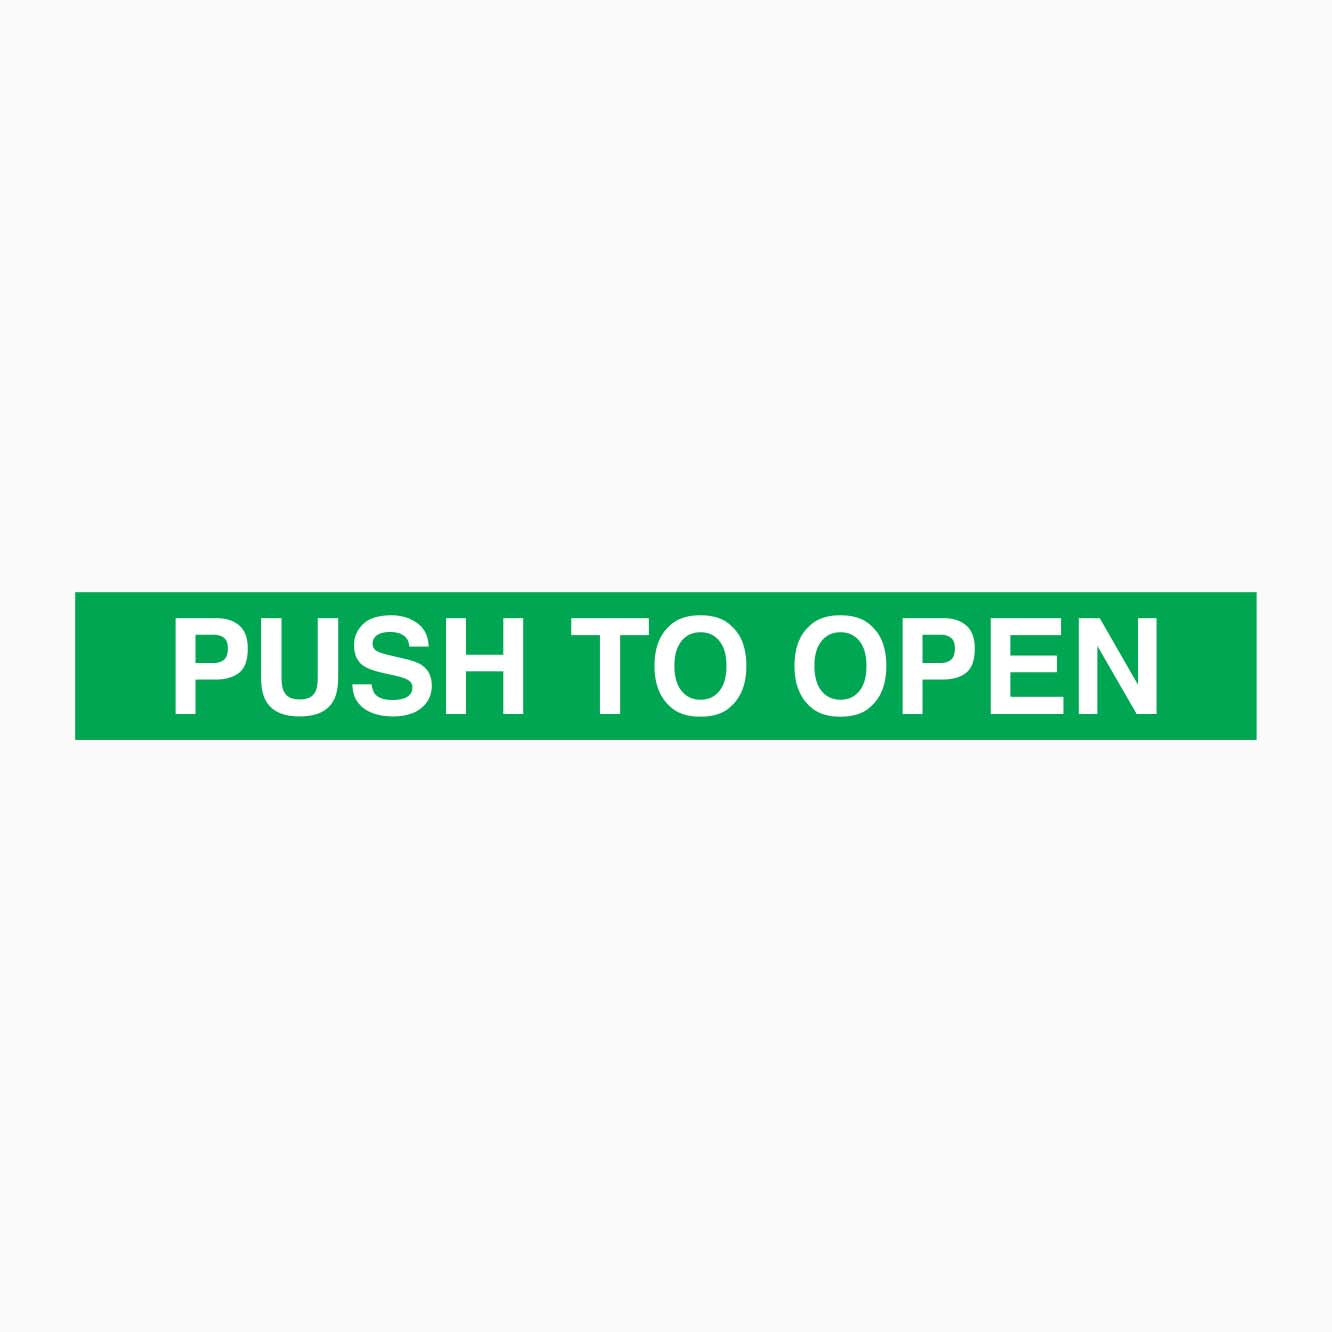 PUSH TO OPEN SIGN - GREEN BACKGROUND - GET SIGNS